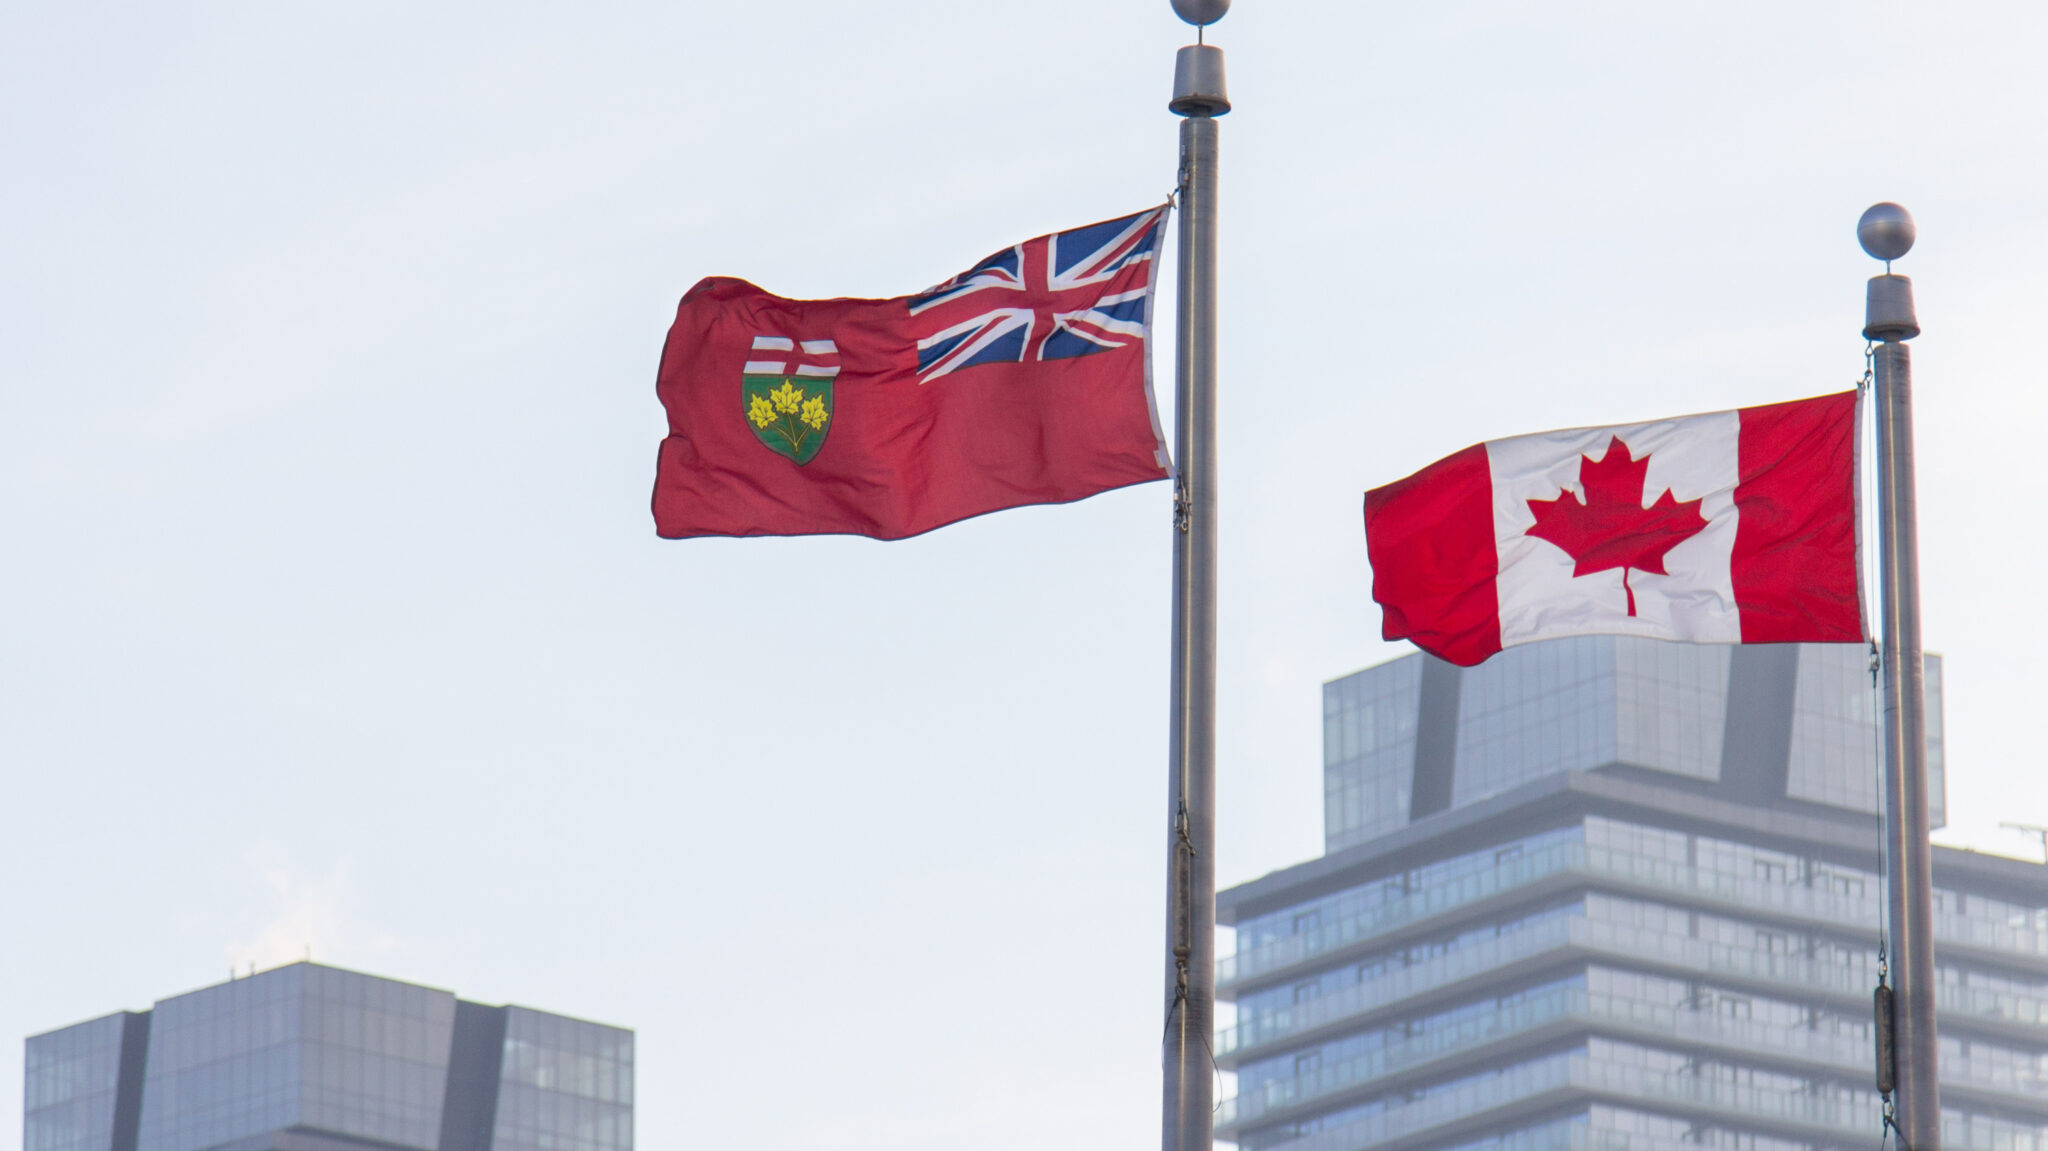 Governments of Canada, Ontario, fund high-speed internet projects by YorkNet, Bell, and K-Net